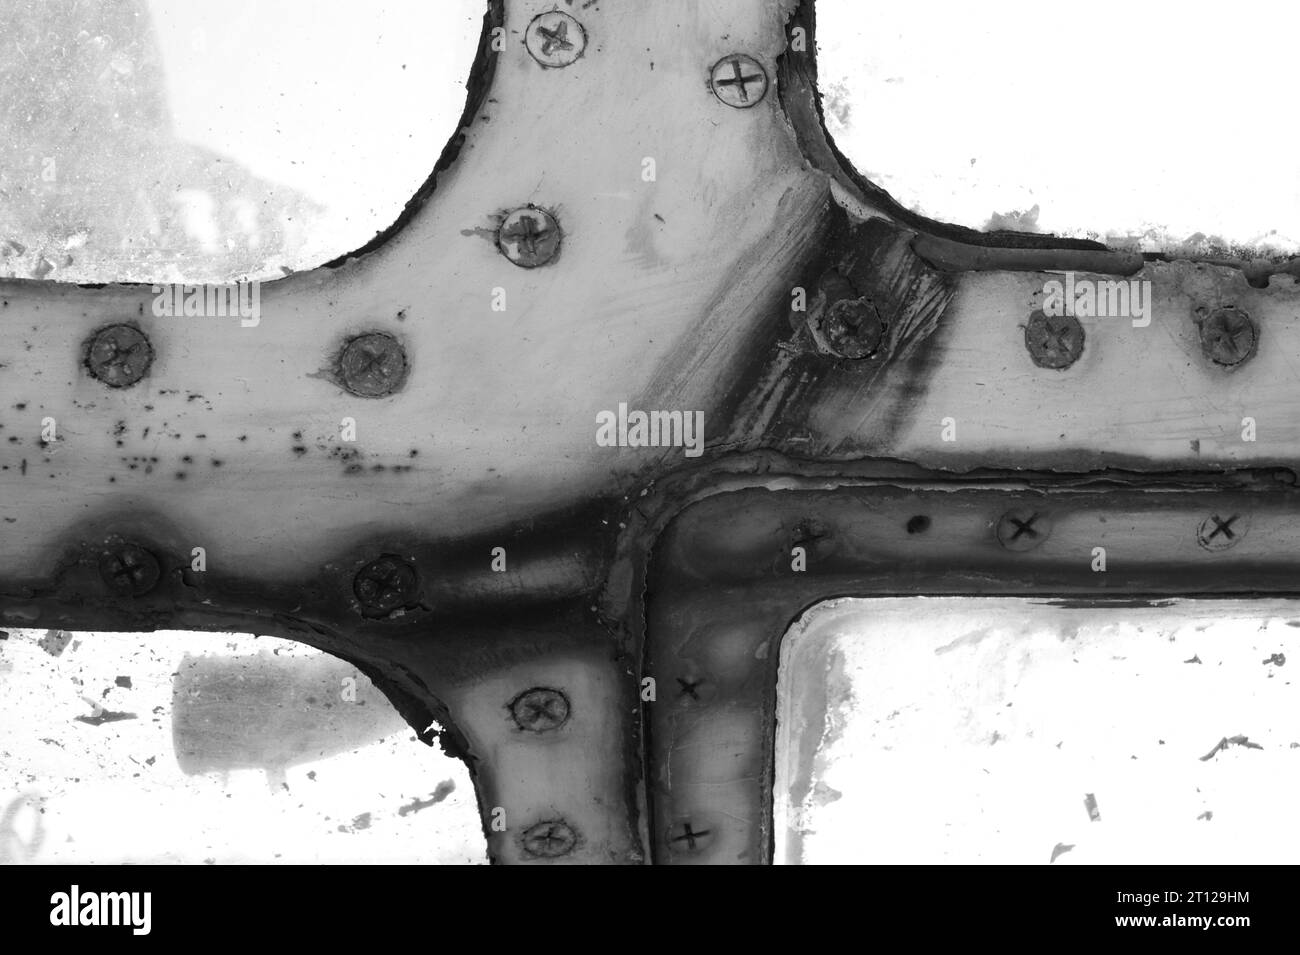 Rusty window frame of an old airplane with screws. Black and white photo. Stock Photo